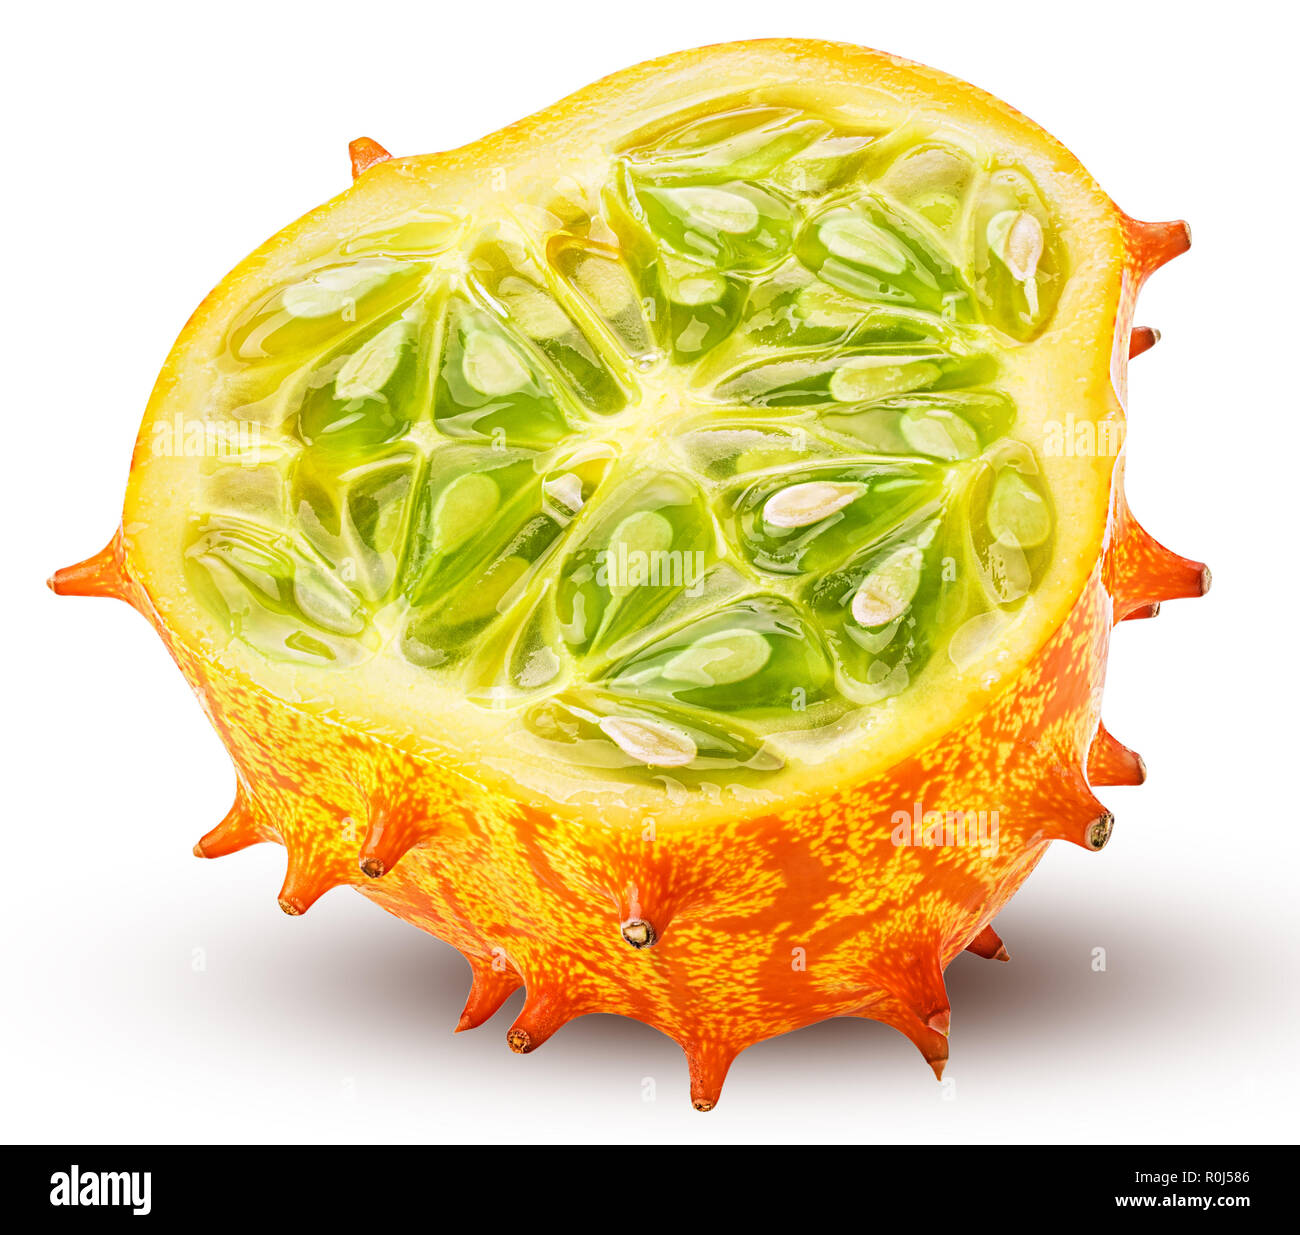 Kiwano, horned melon cut in half isolated on white background. Clipping Path. Full depth of field. Stock Photo